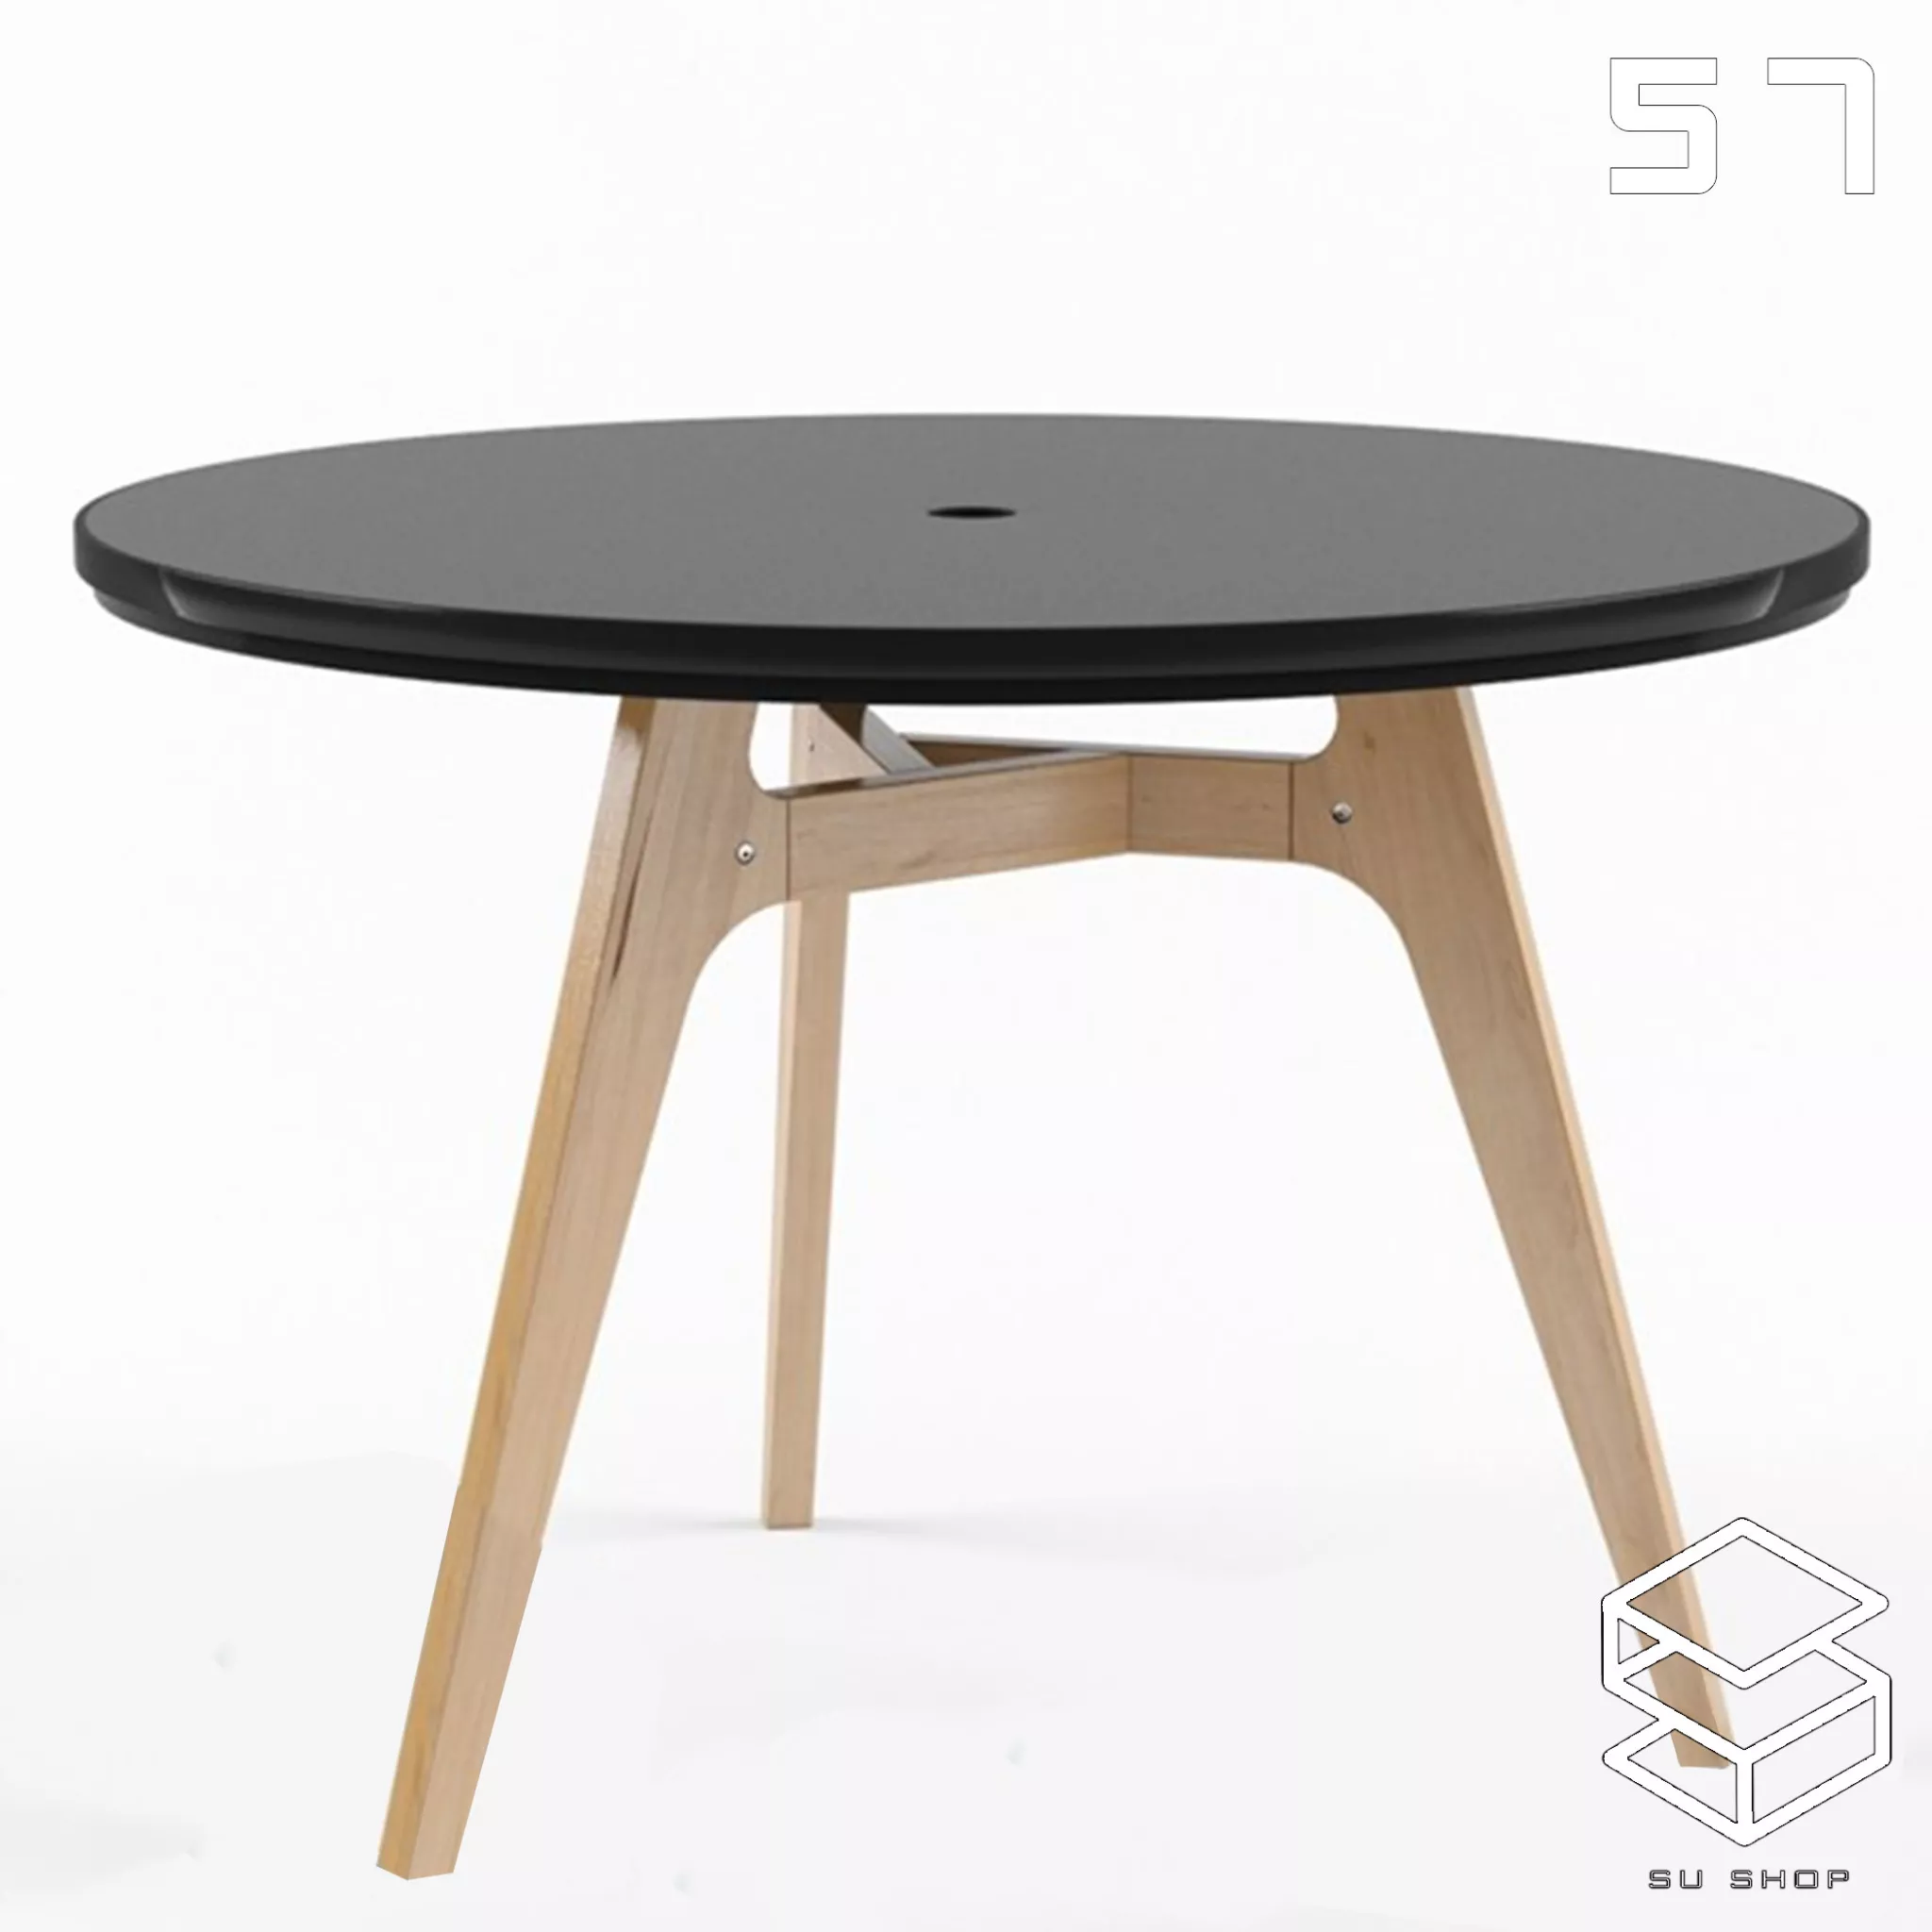 MODERN TEA TABLE - SKETCHUP 3D MODEL - VRAY OR ENSCAPE - ID15068